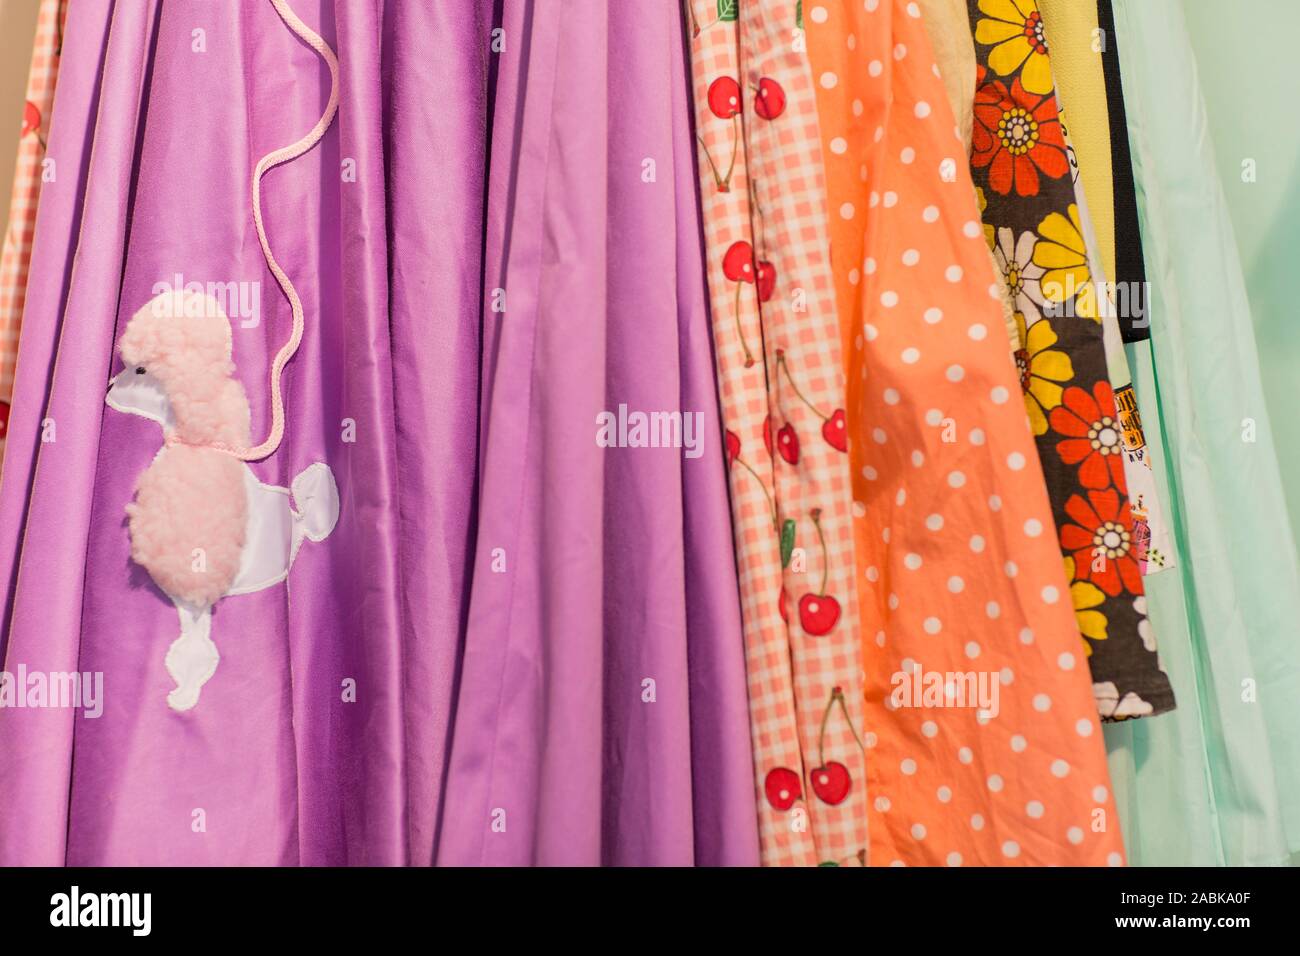 Sideview of colorful vintage skirts with different patterns, colors and textures hanging on a rack. Thrift, second hand, circular economy, recycle Stock Photo